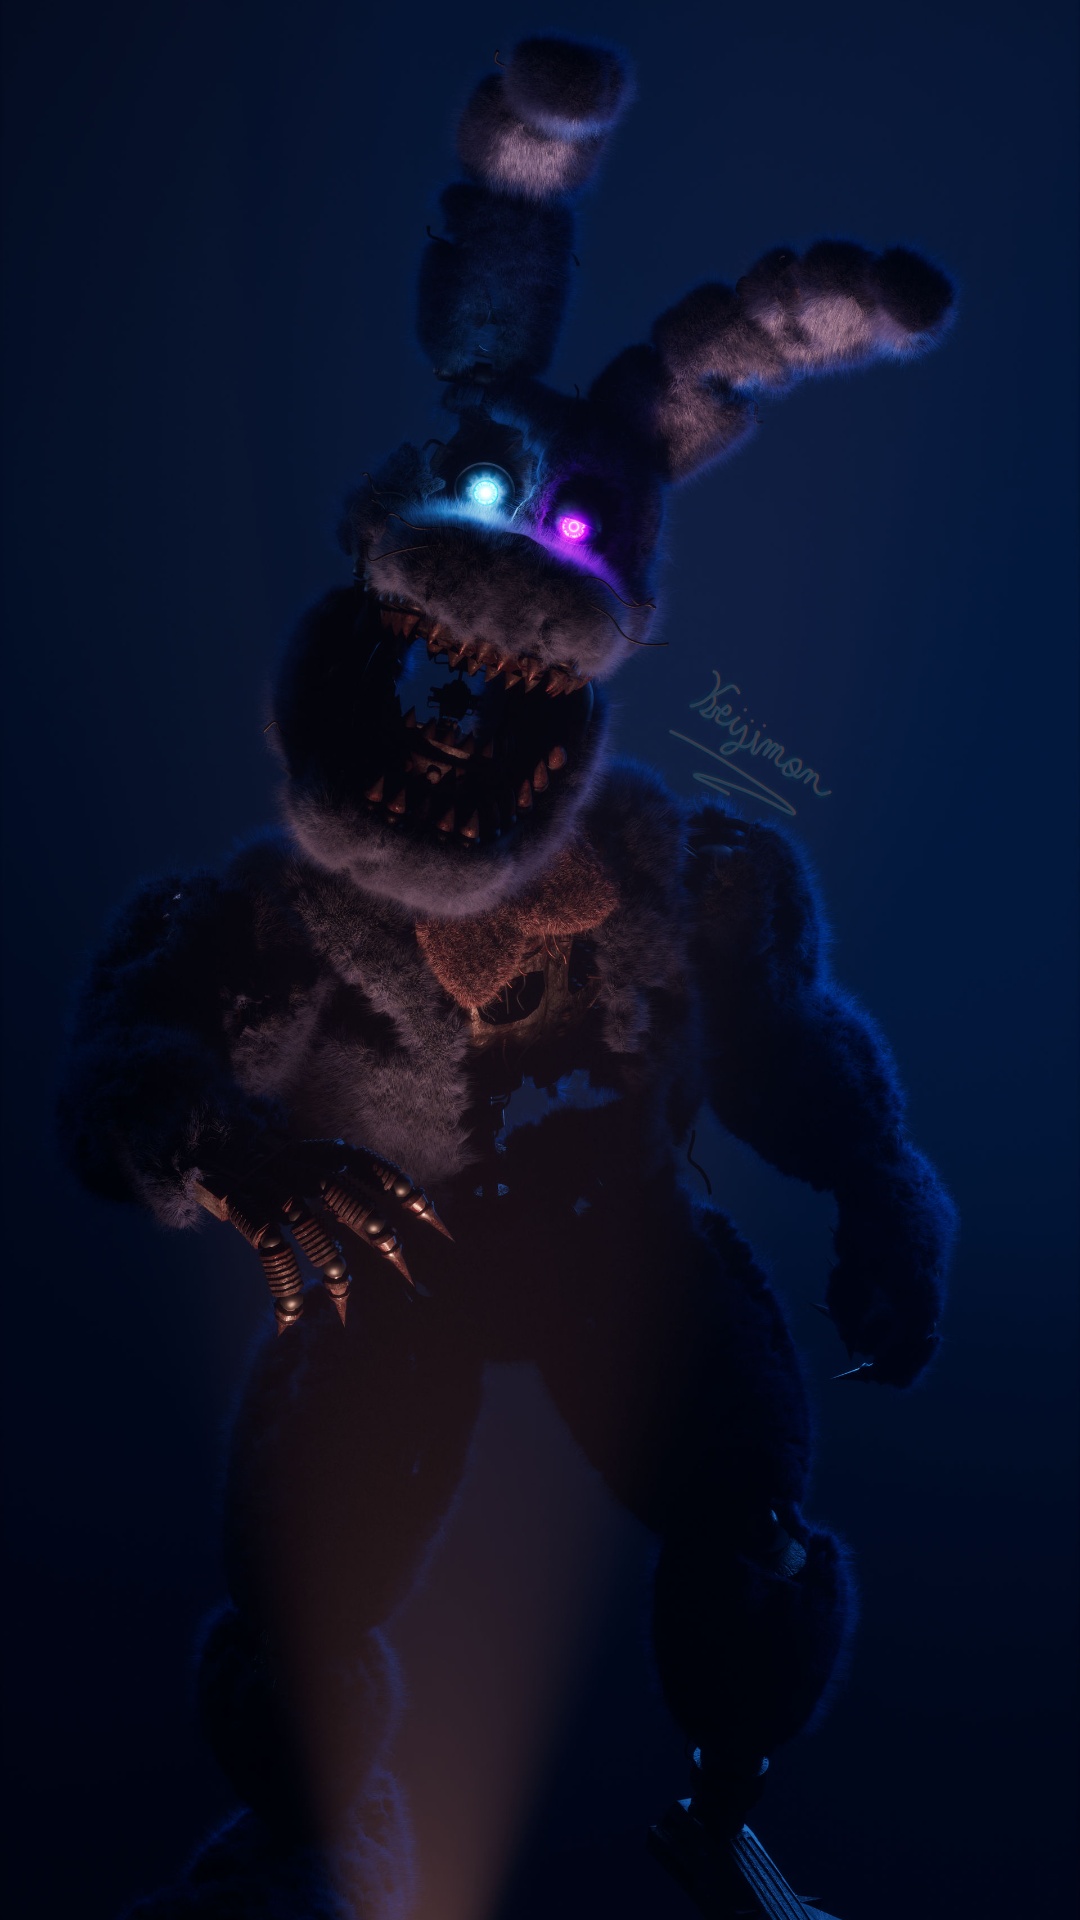 Nightmare Bonnie Wallpaper Images